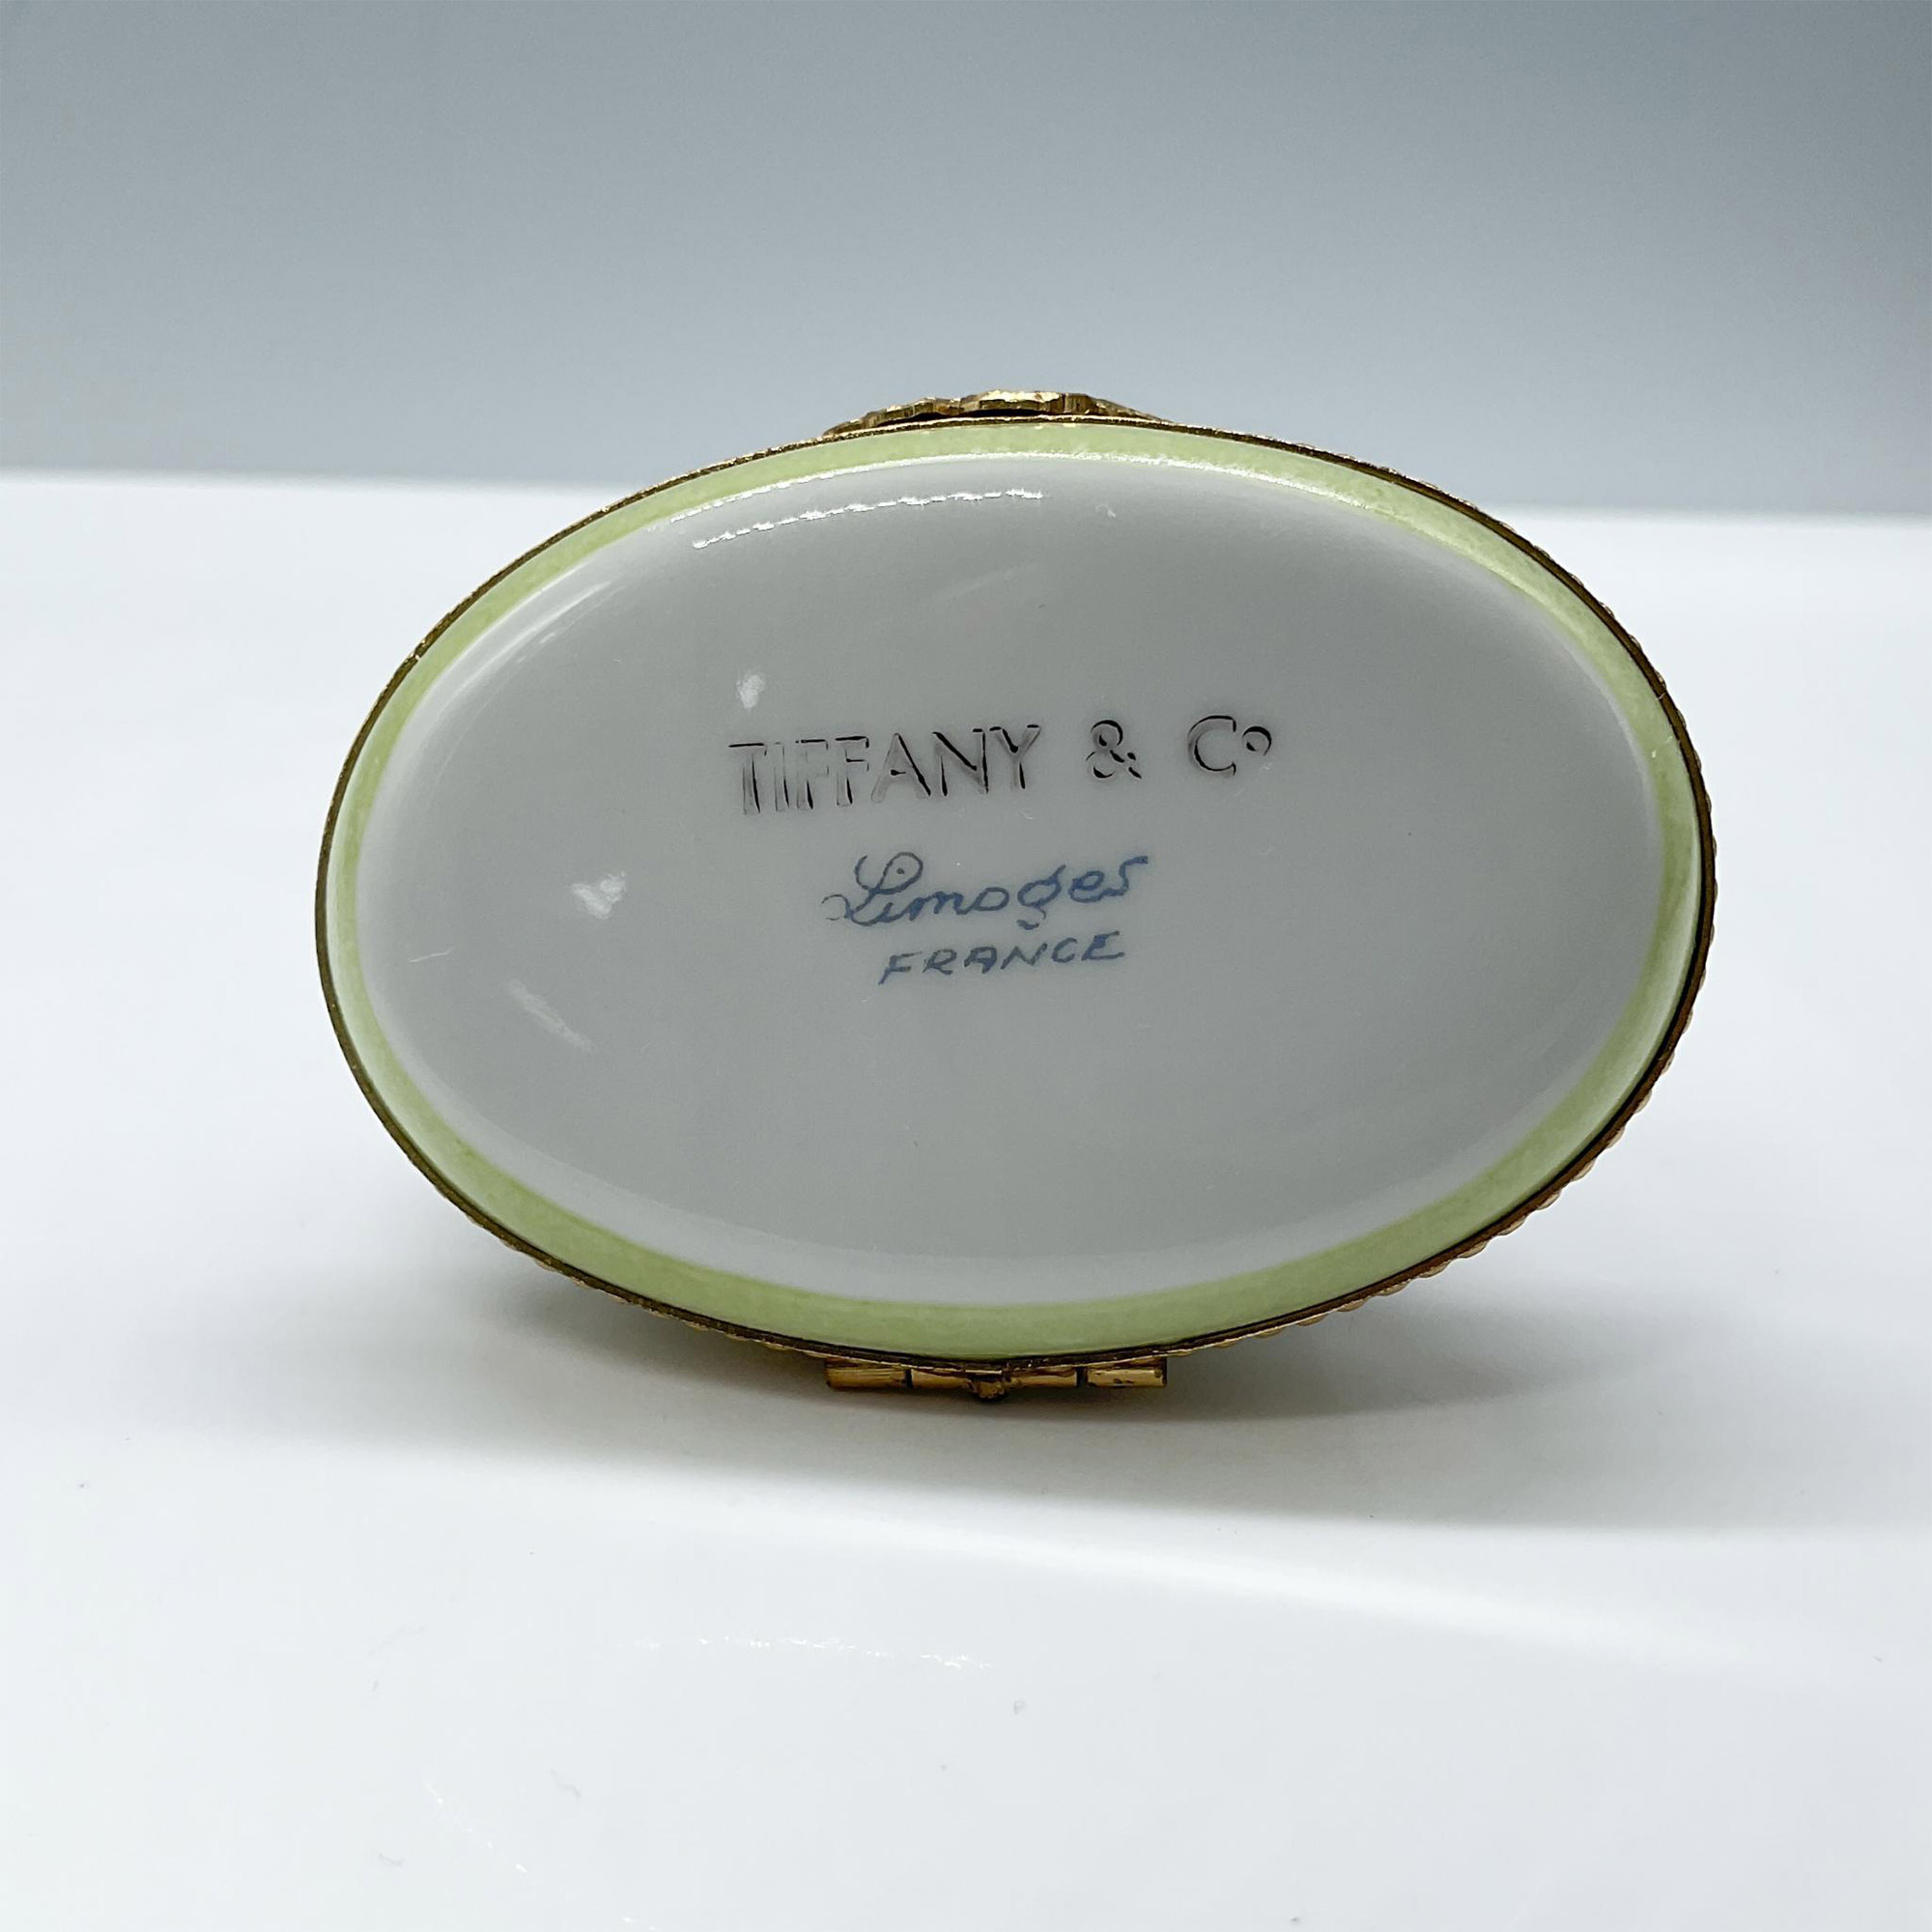 Tiffany & Co x Limoges France Treasure Box, Brown Cat - Image 4 of 4